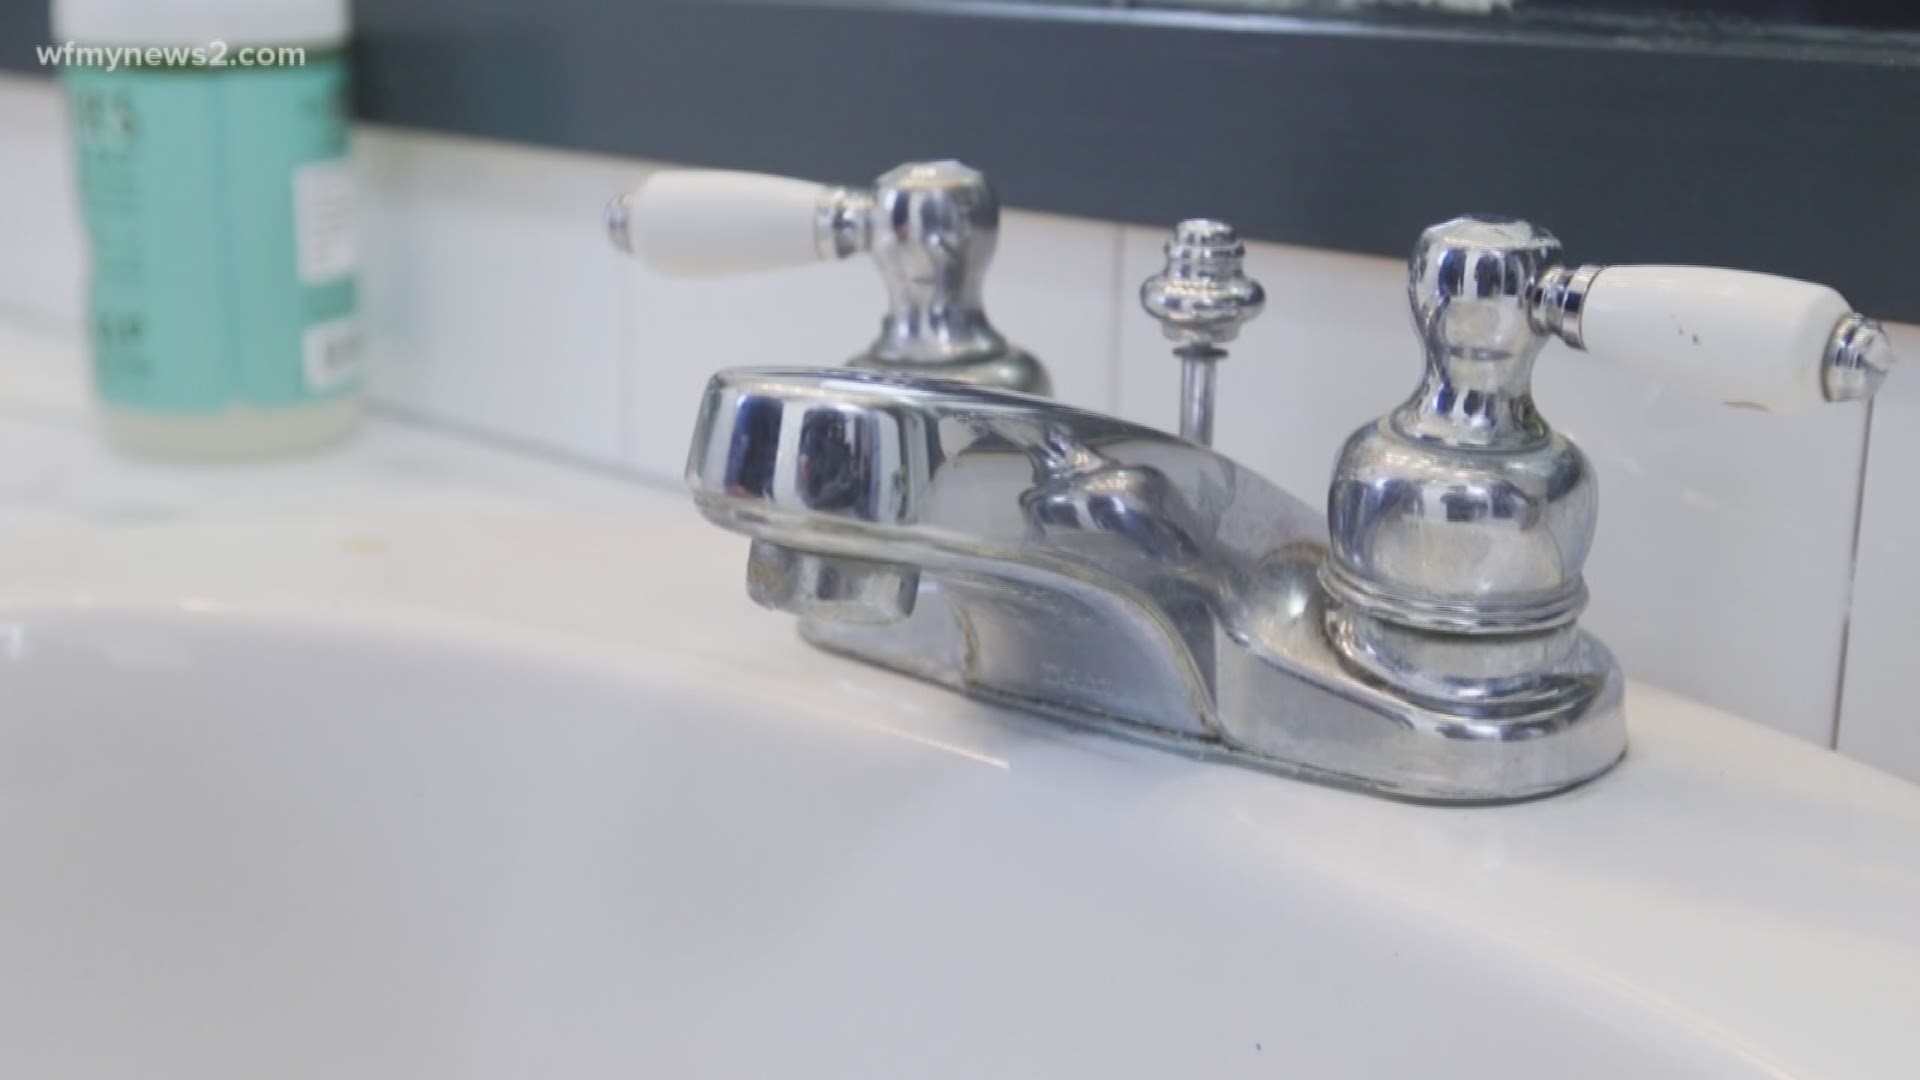 Don't call the plumber just yet, you may just be able to fix that leak yourself with a few simple tricks.